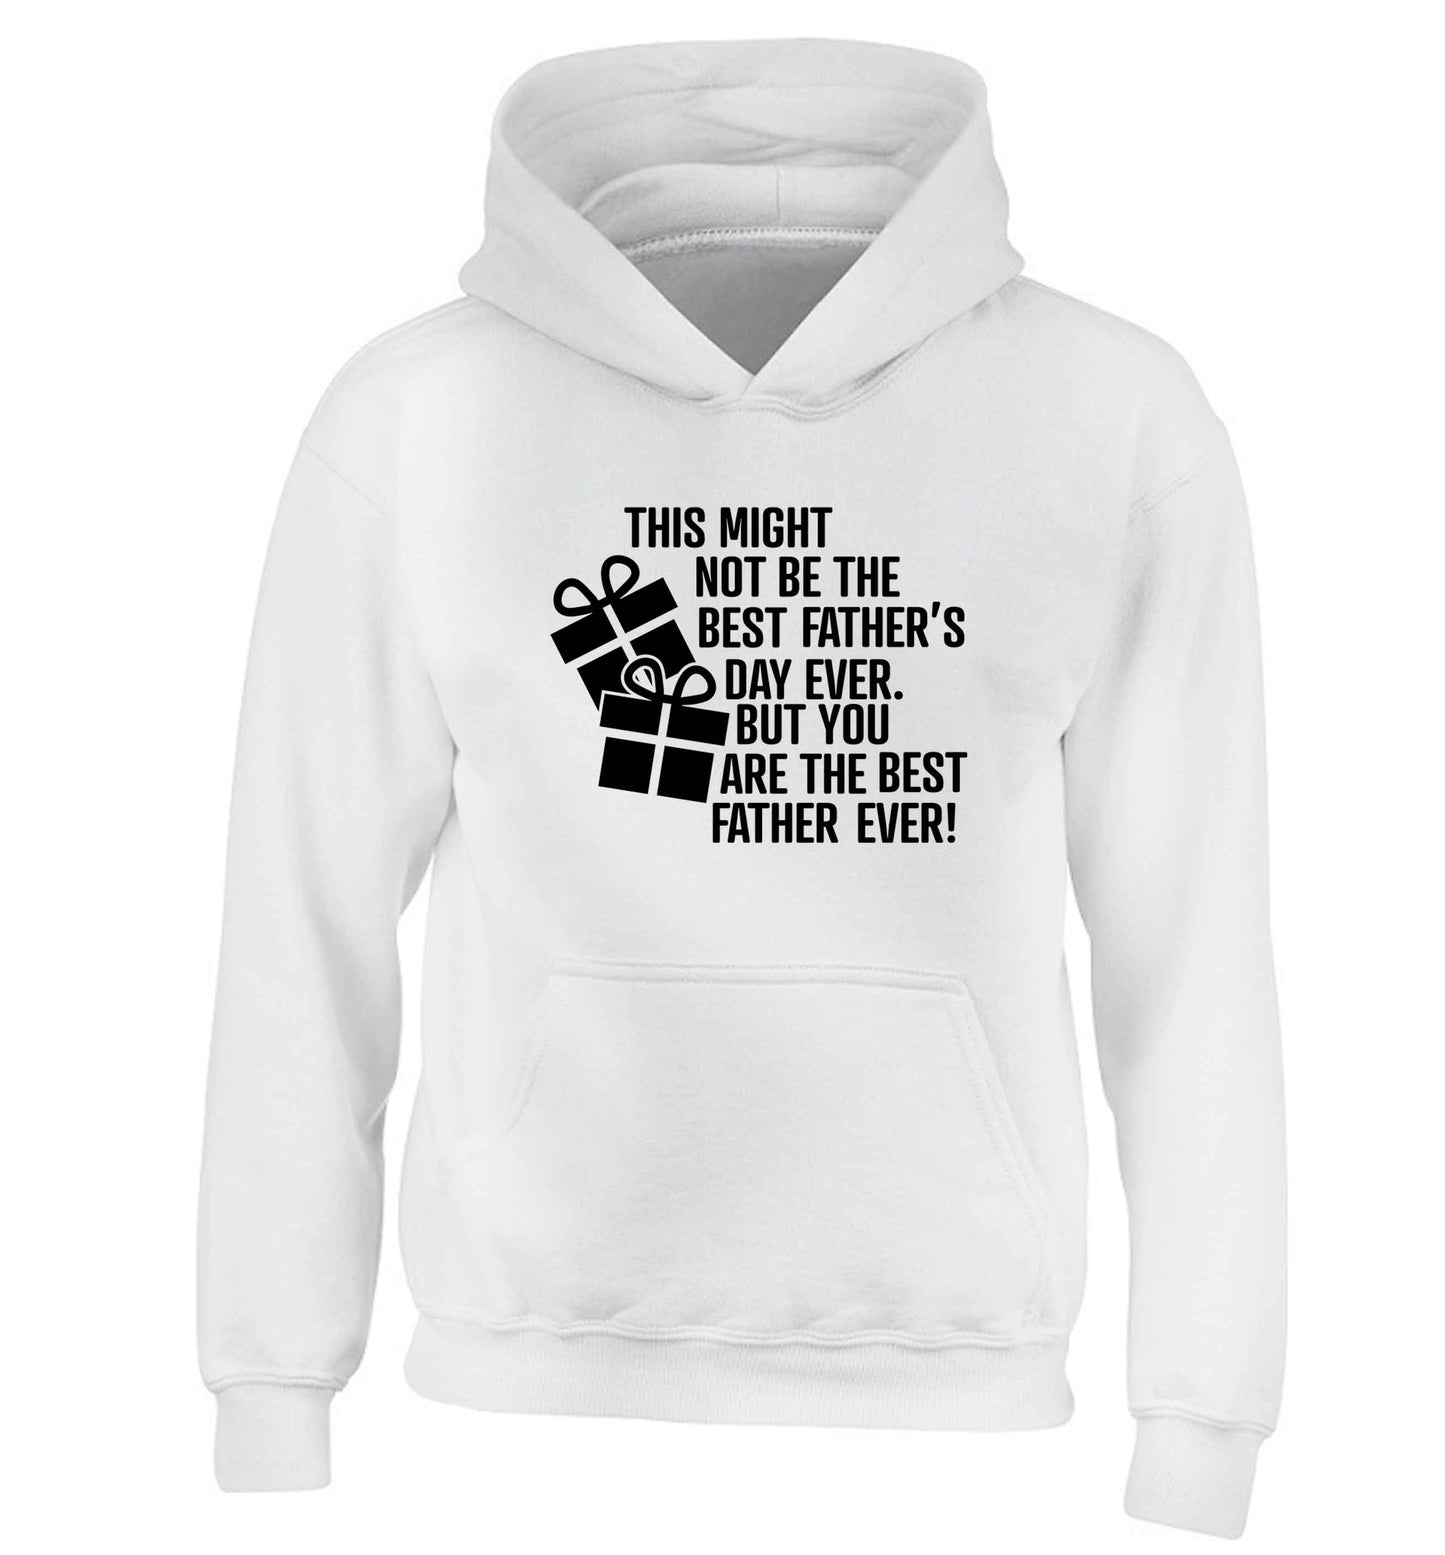 It might not be the best Father's Day ever but you are the best father ever! children's white hoodie 12-13 Years